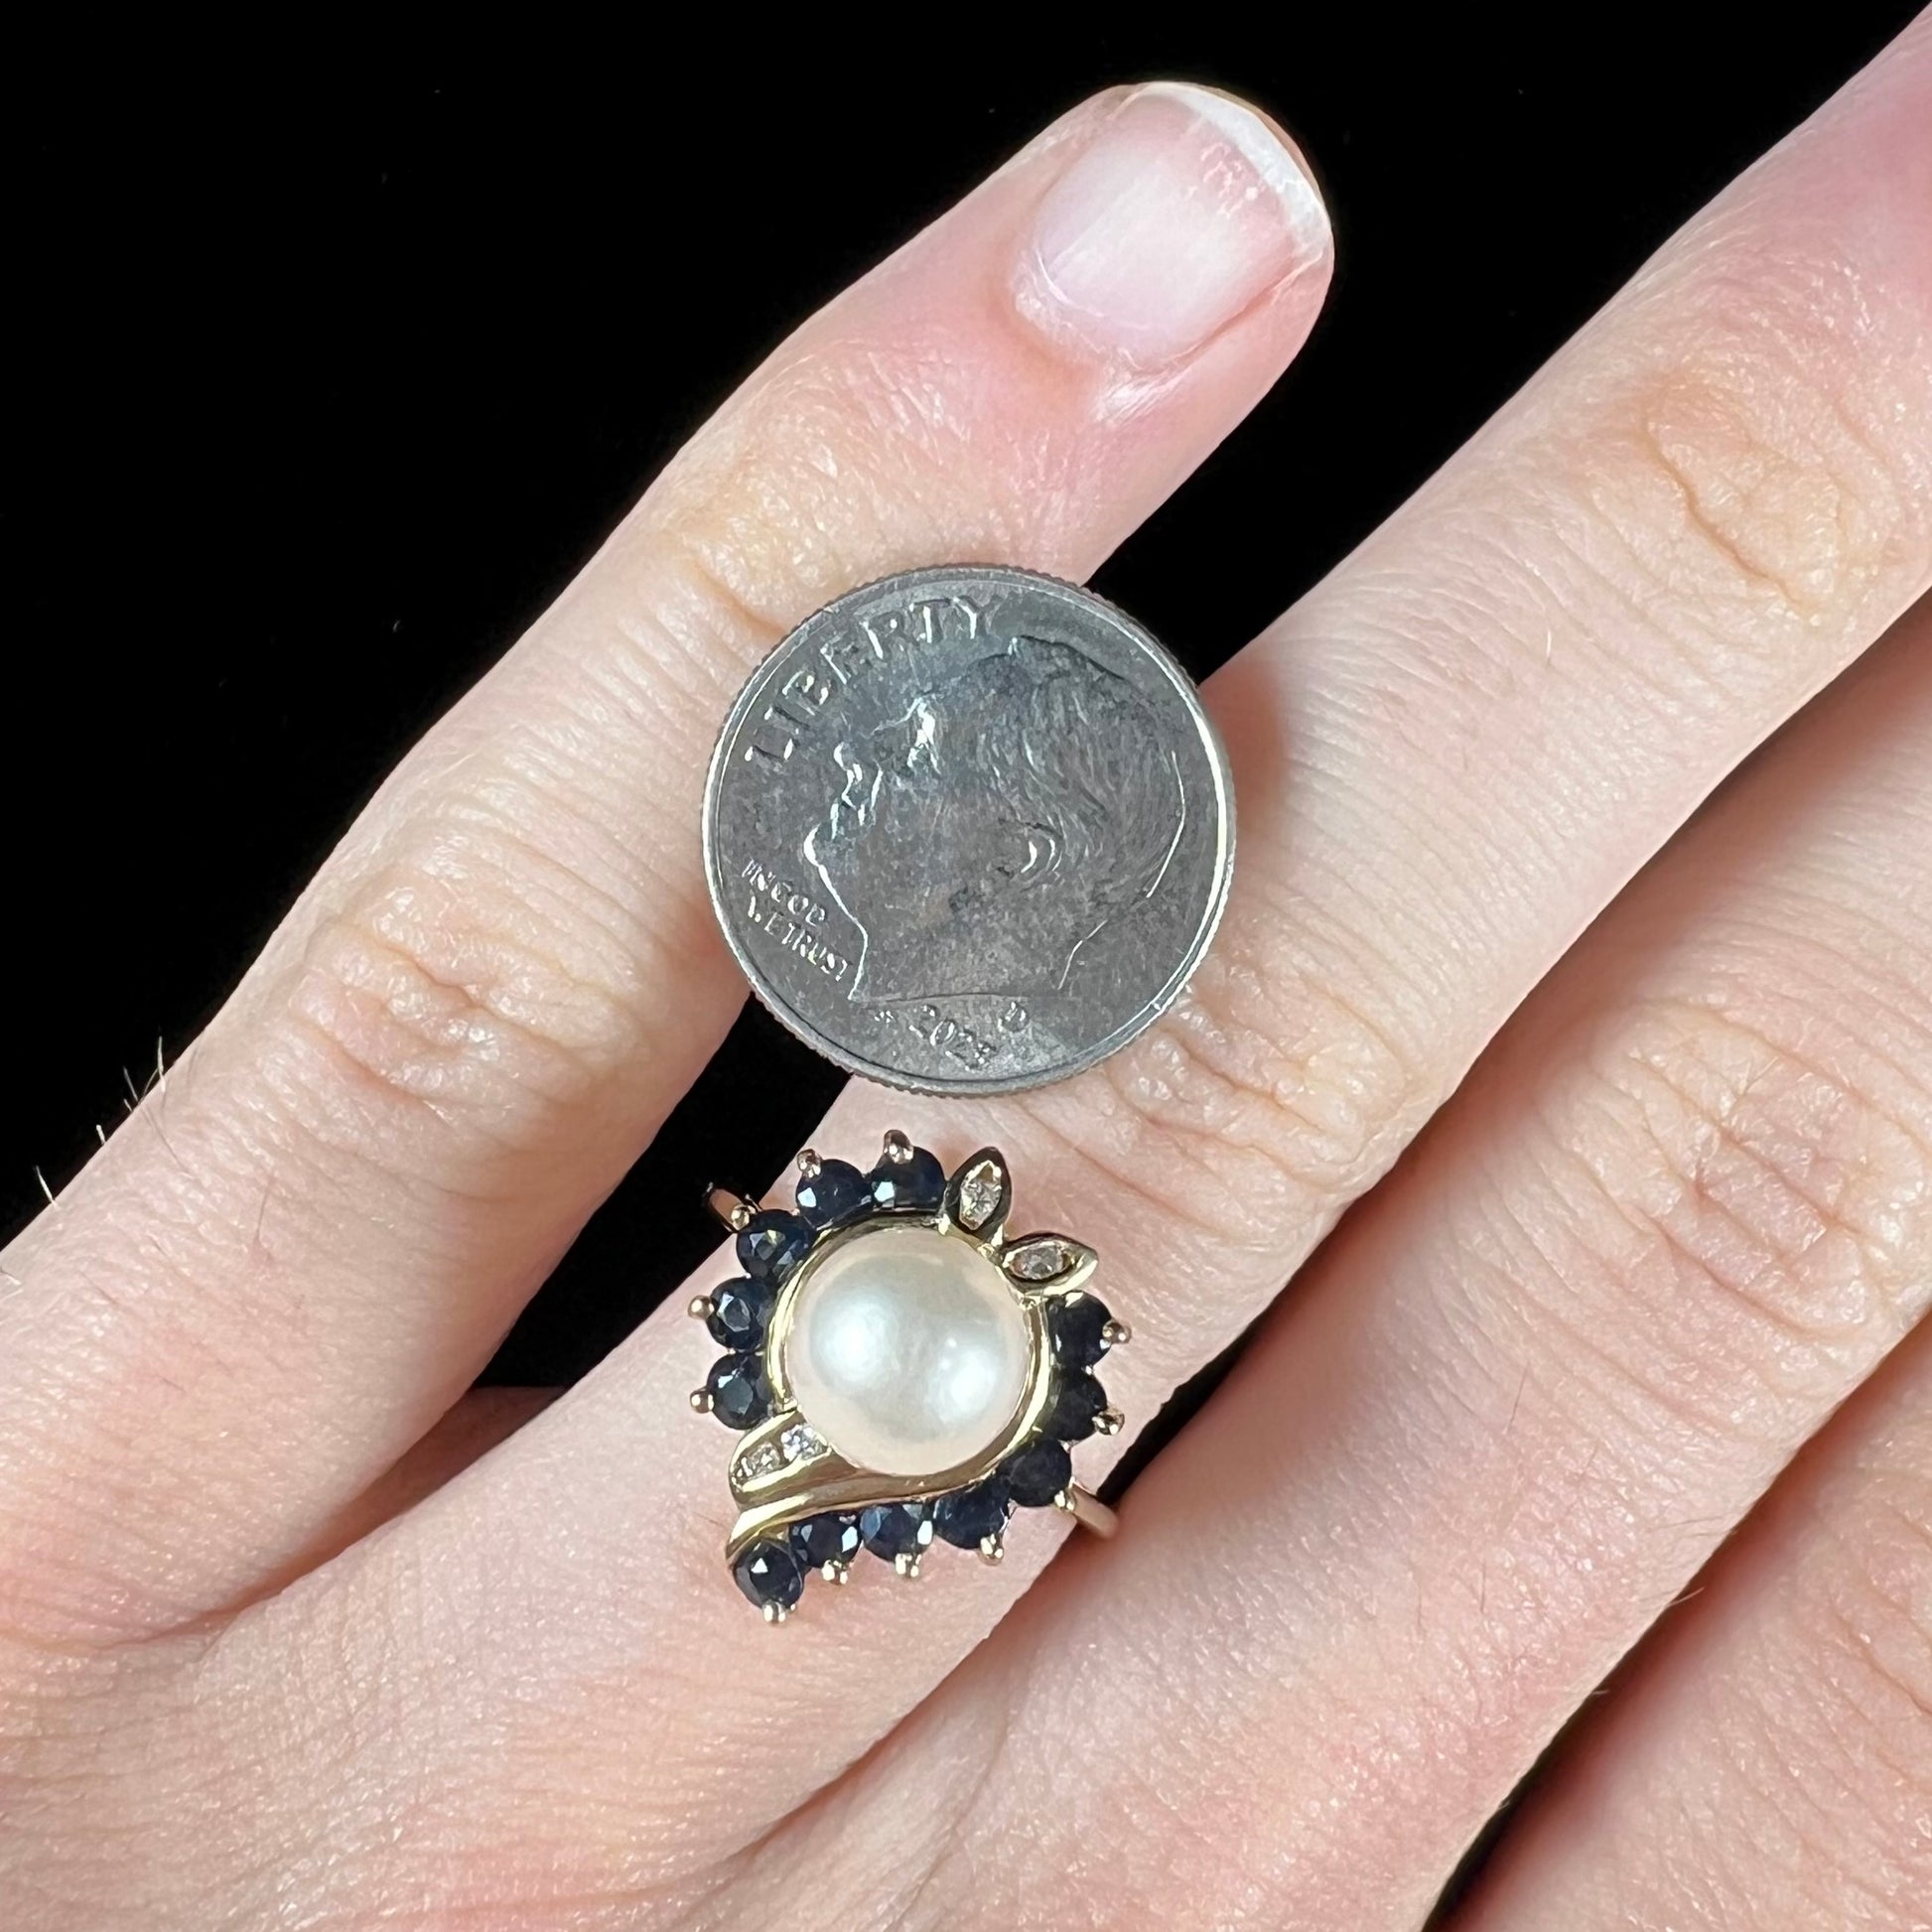 A yellow gold, heart shaped ring set with a freshwater pearl surrounded by blue sapphire and diamond accent stones.